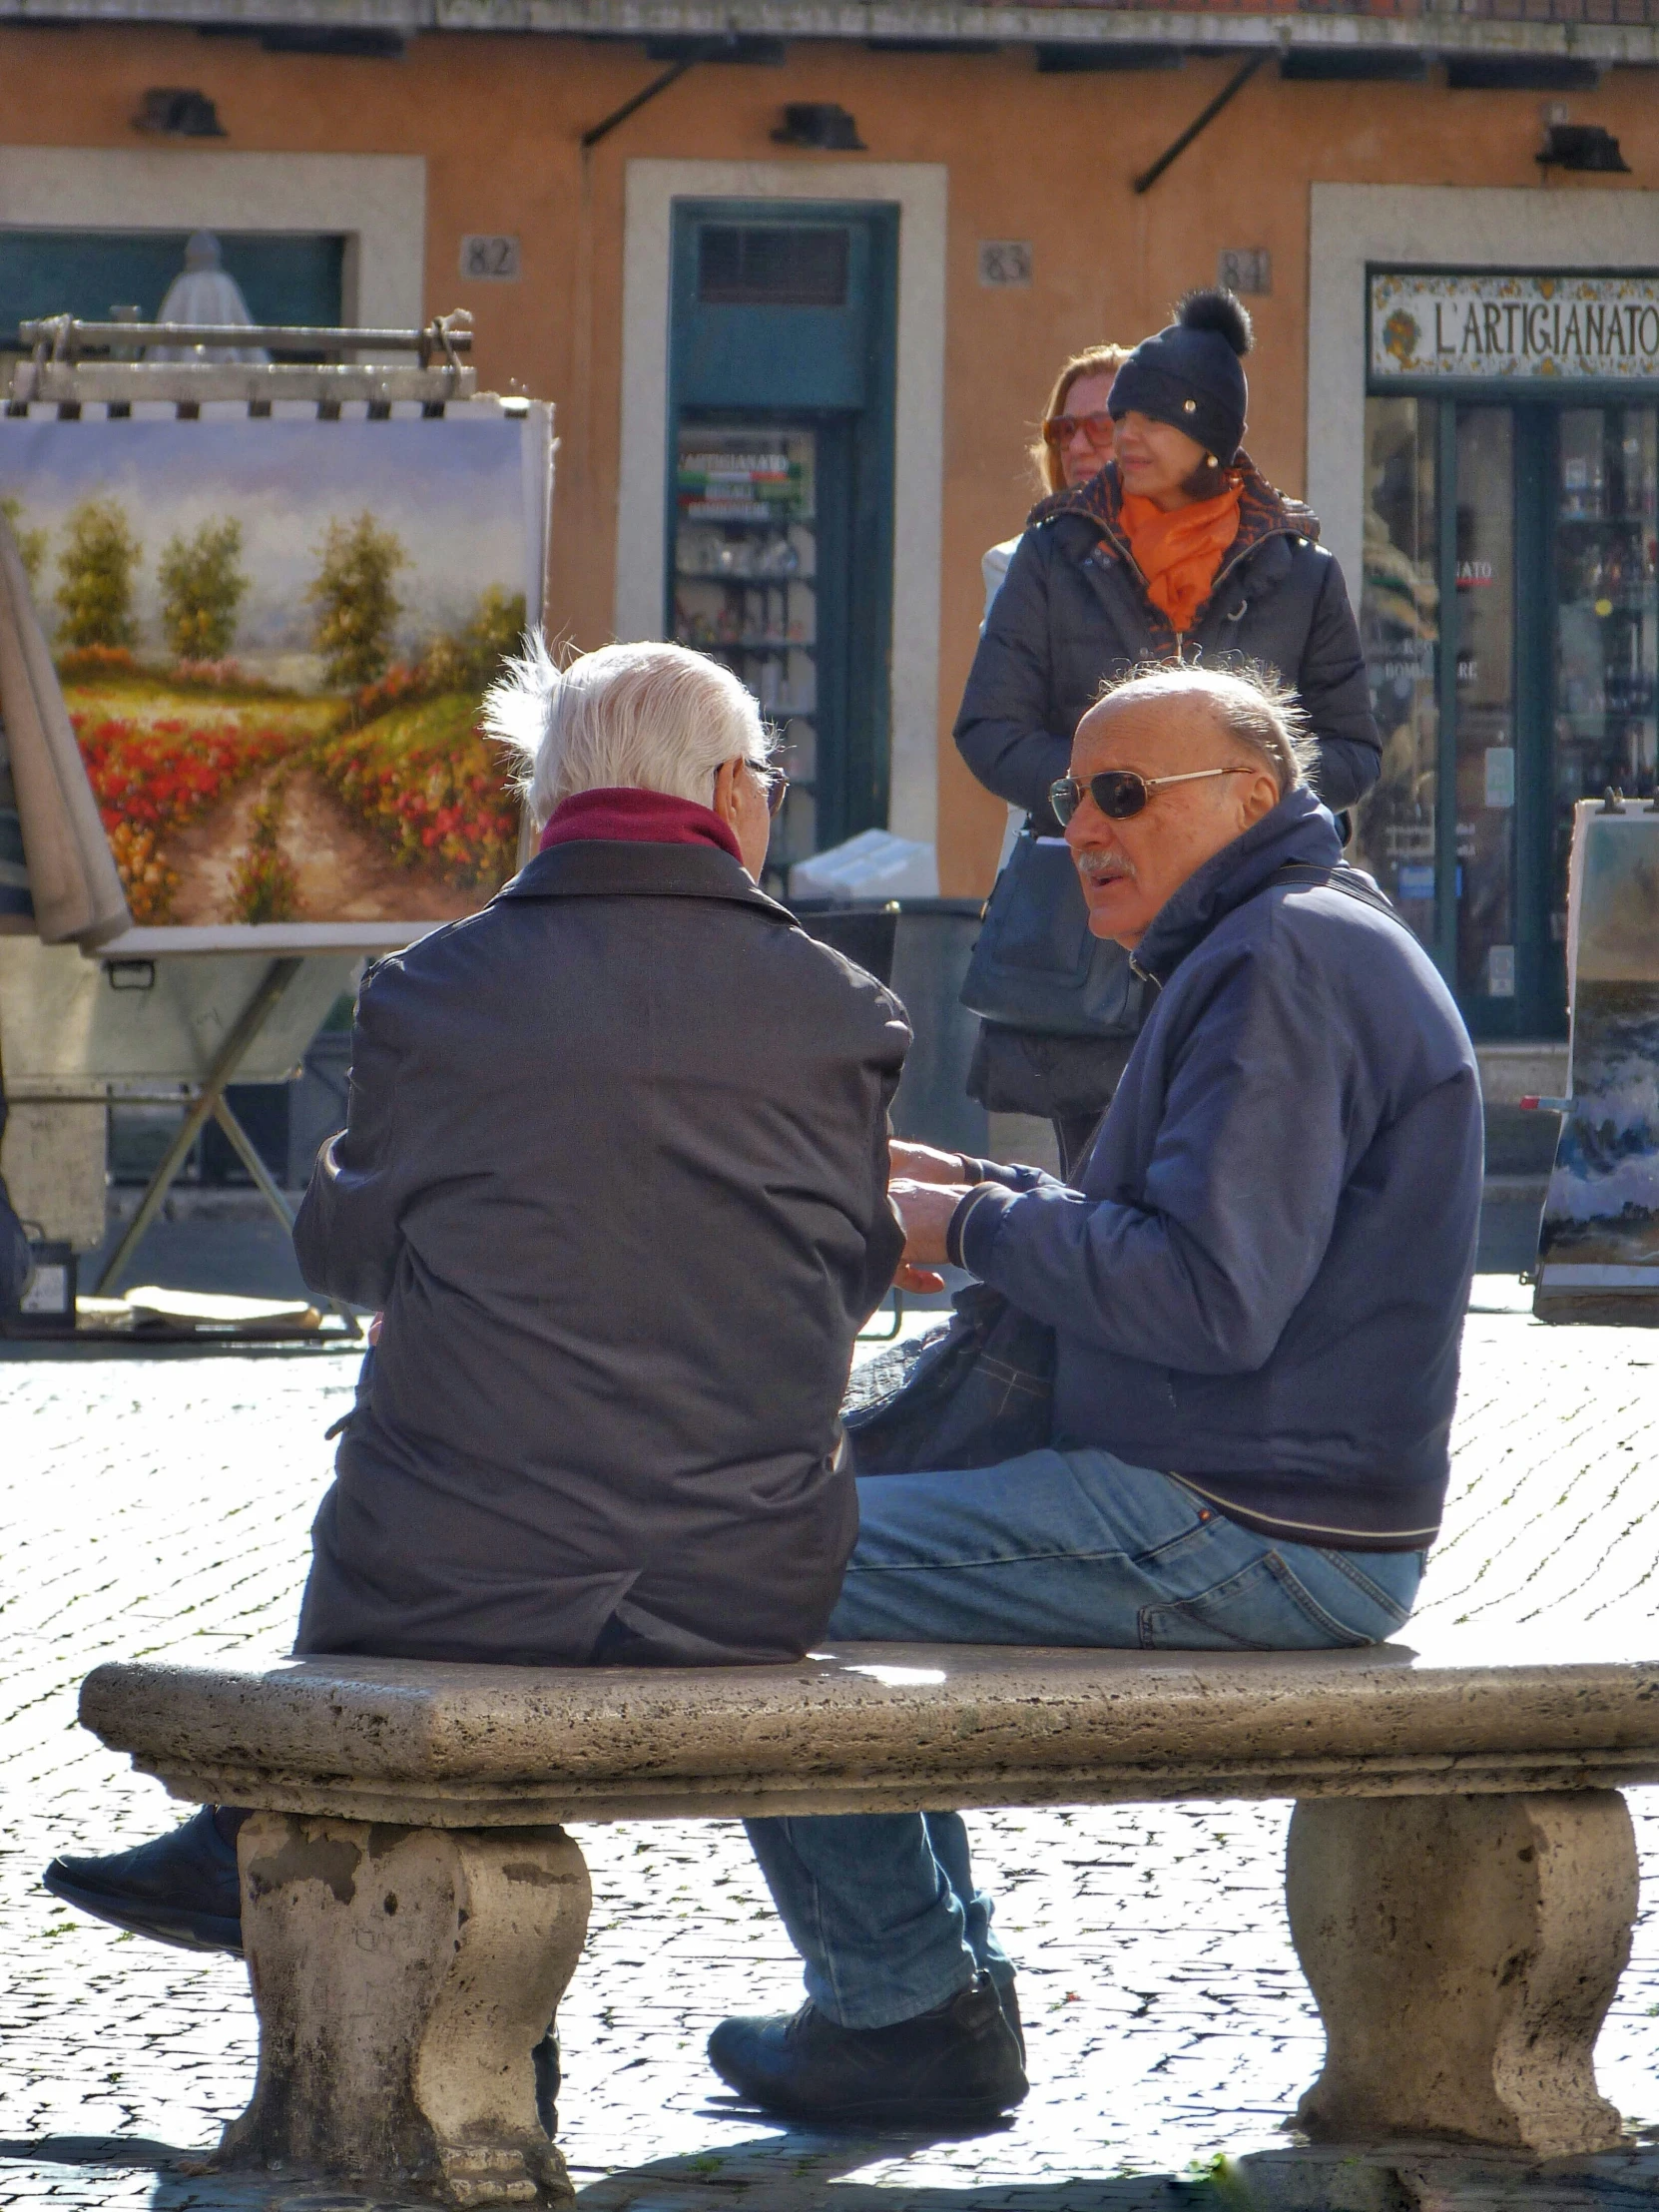 two men sitting on a bench outside and an older man talking to them